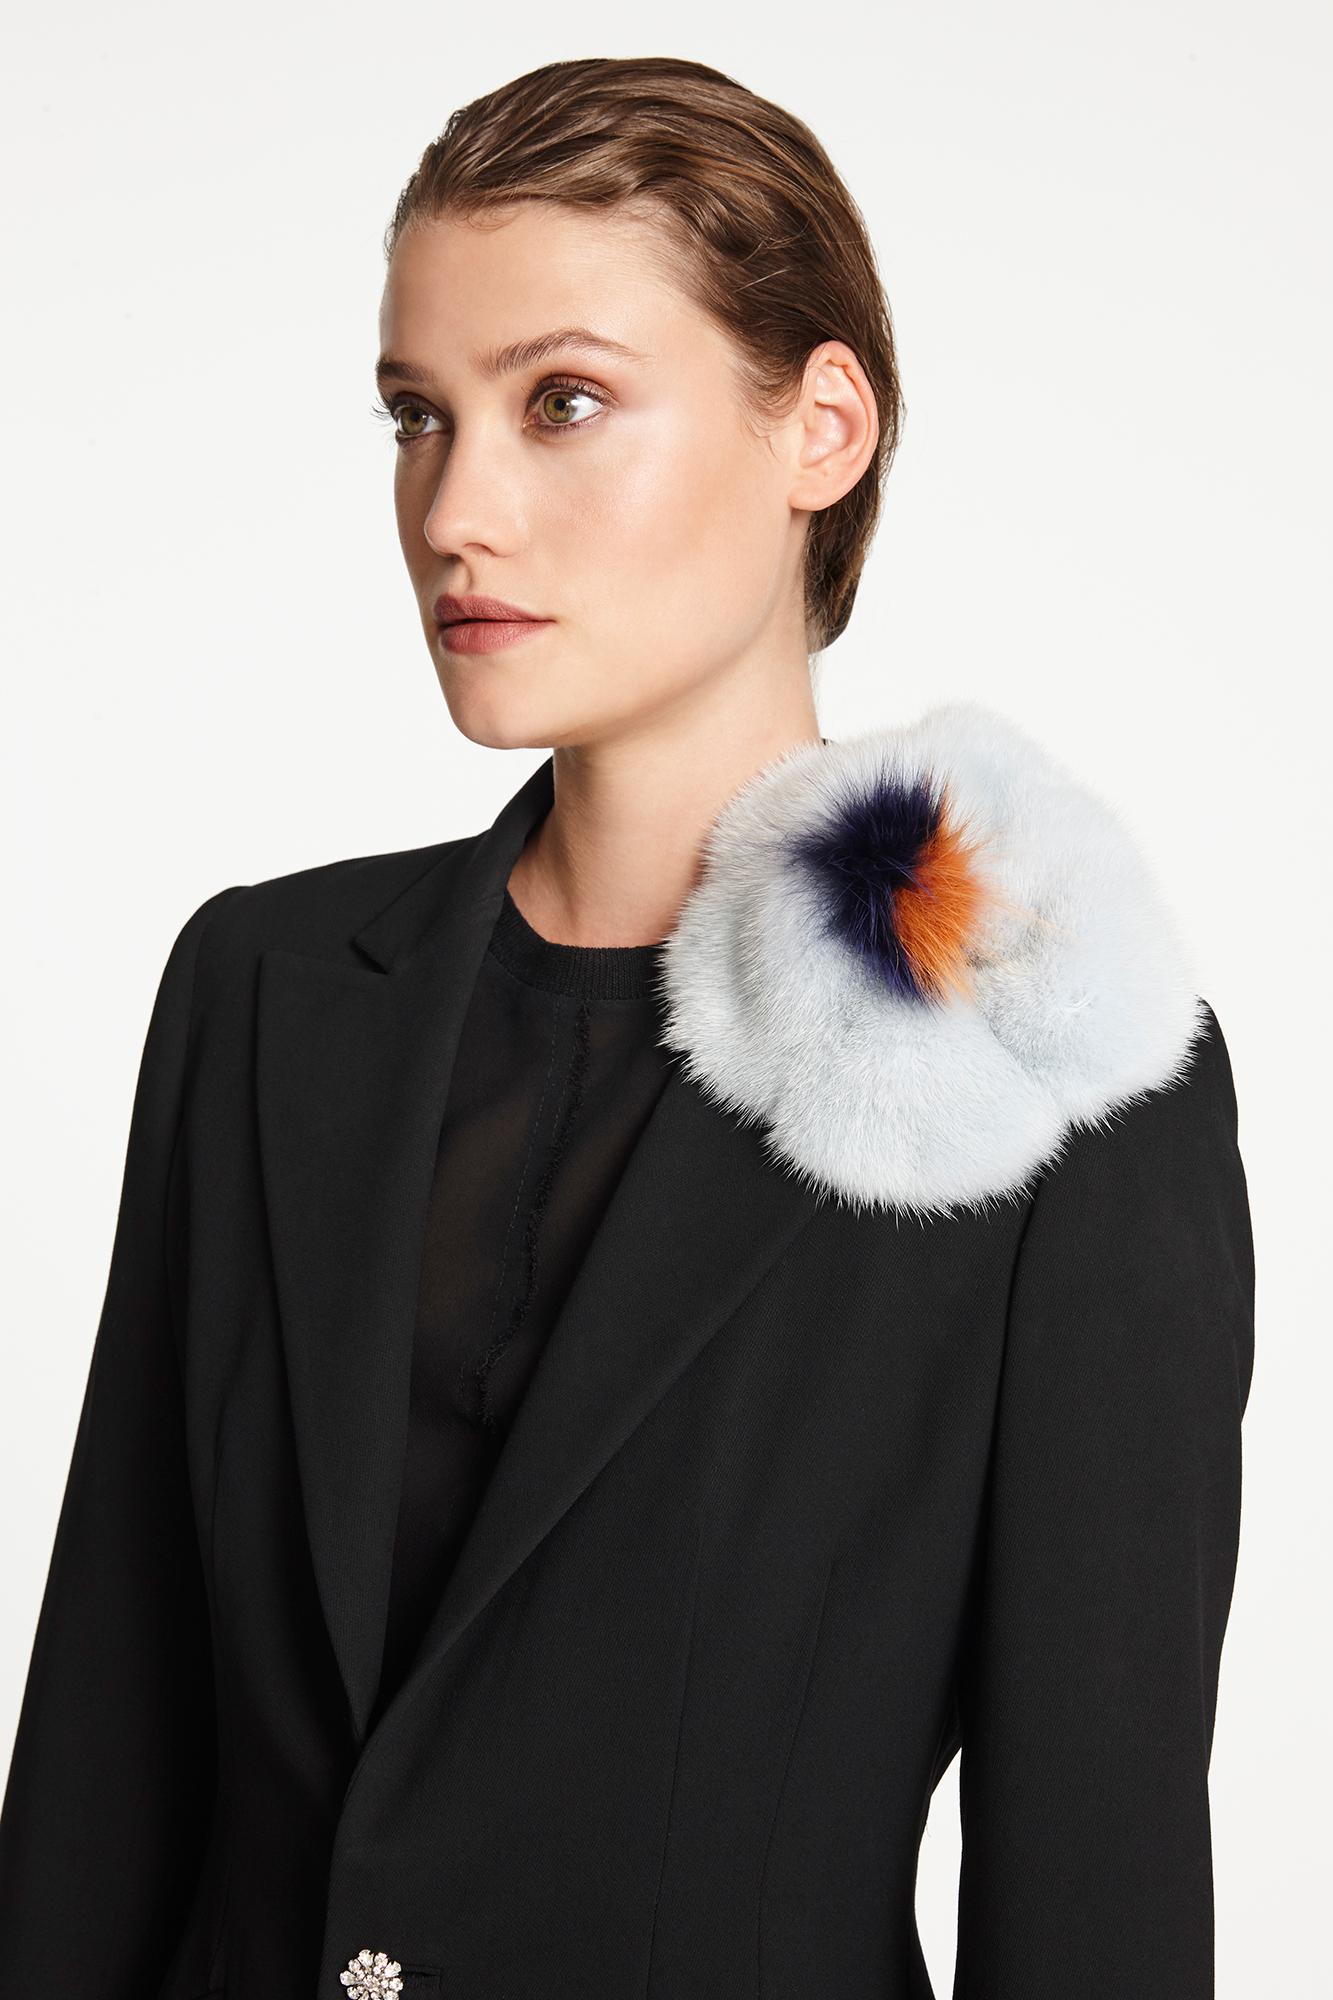 Verheyen London Mink Fur Flower Brooch in Iced Topaz Blue - Brand New 

The perfect gift, this Verheyen London mink fur flower brooch is designed to add a glimmer of warmth and fun to your look.  Wear on your favourite winter knit or over a cape for